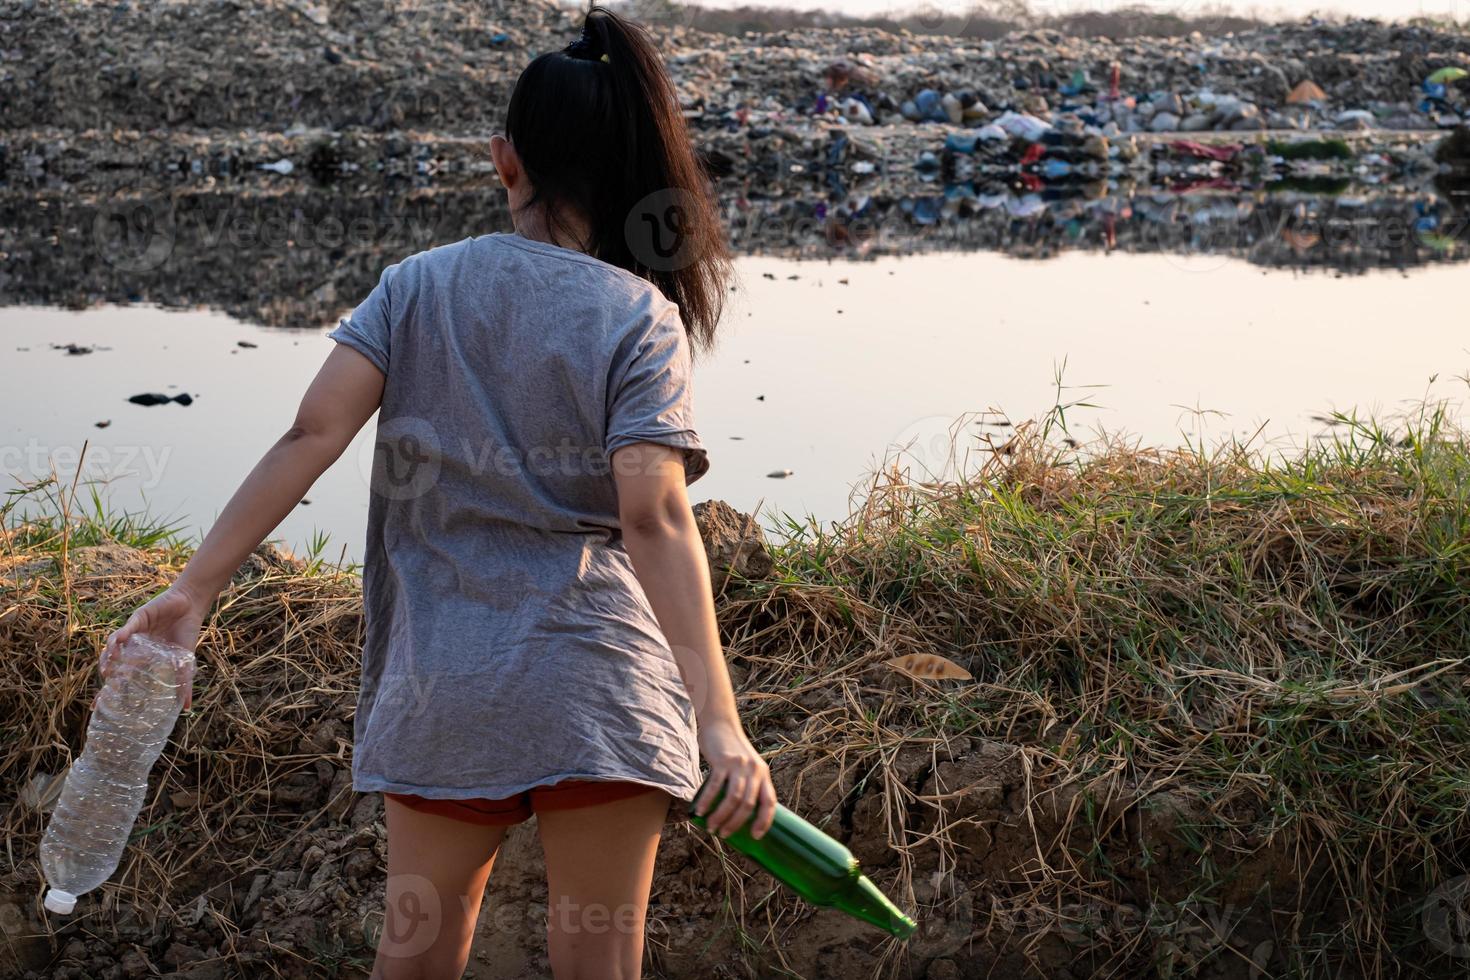 The back woman stands in hand have green glass bottle and clear plastic bottle at mountain large garbage background photo